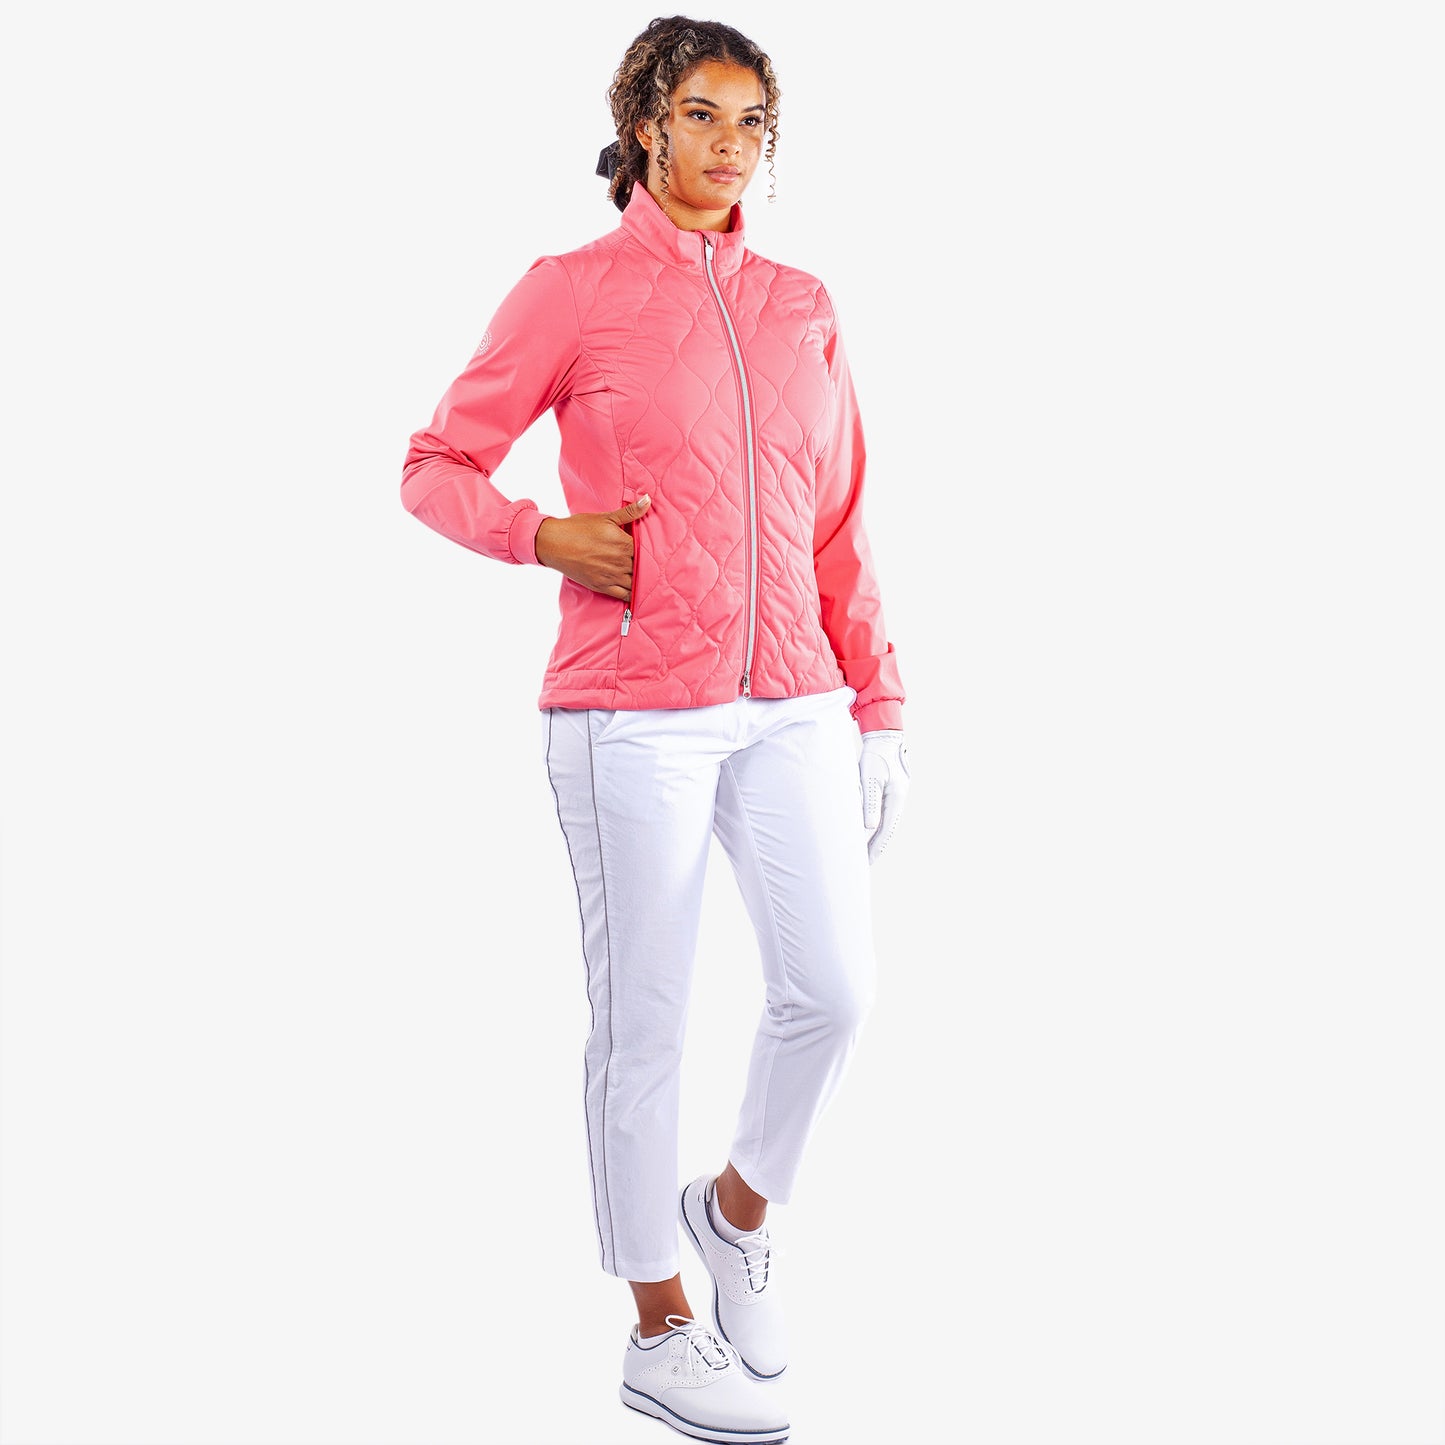 Galvin Green Ladies Quilted INTERFACE Jacket in Camelia Rose